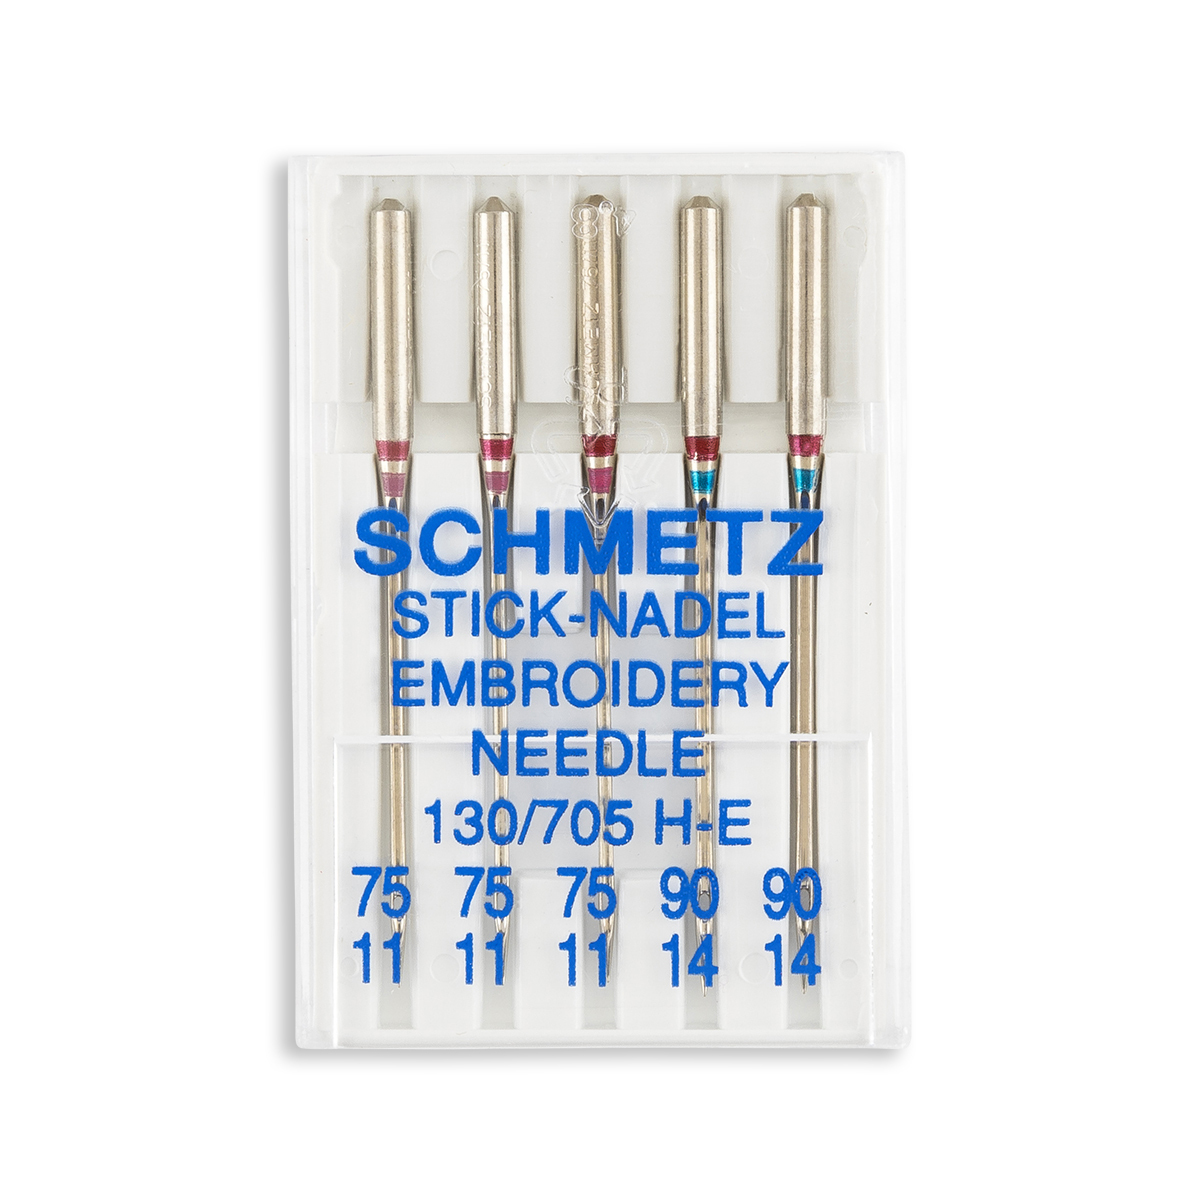 Organ Embroidery Home Machine Needles - Size 11 - 15x1, 130/705H-E - 5/Pack  - WAWAK Sewing Supplies